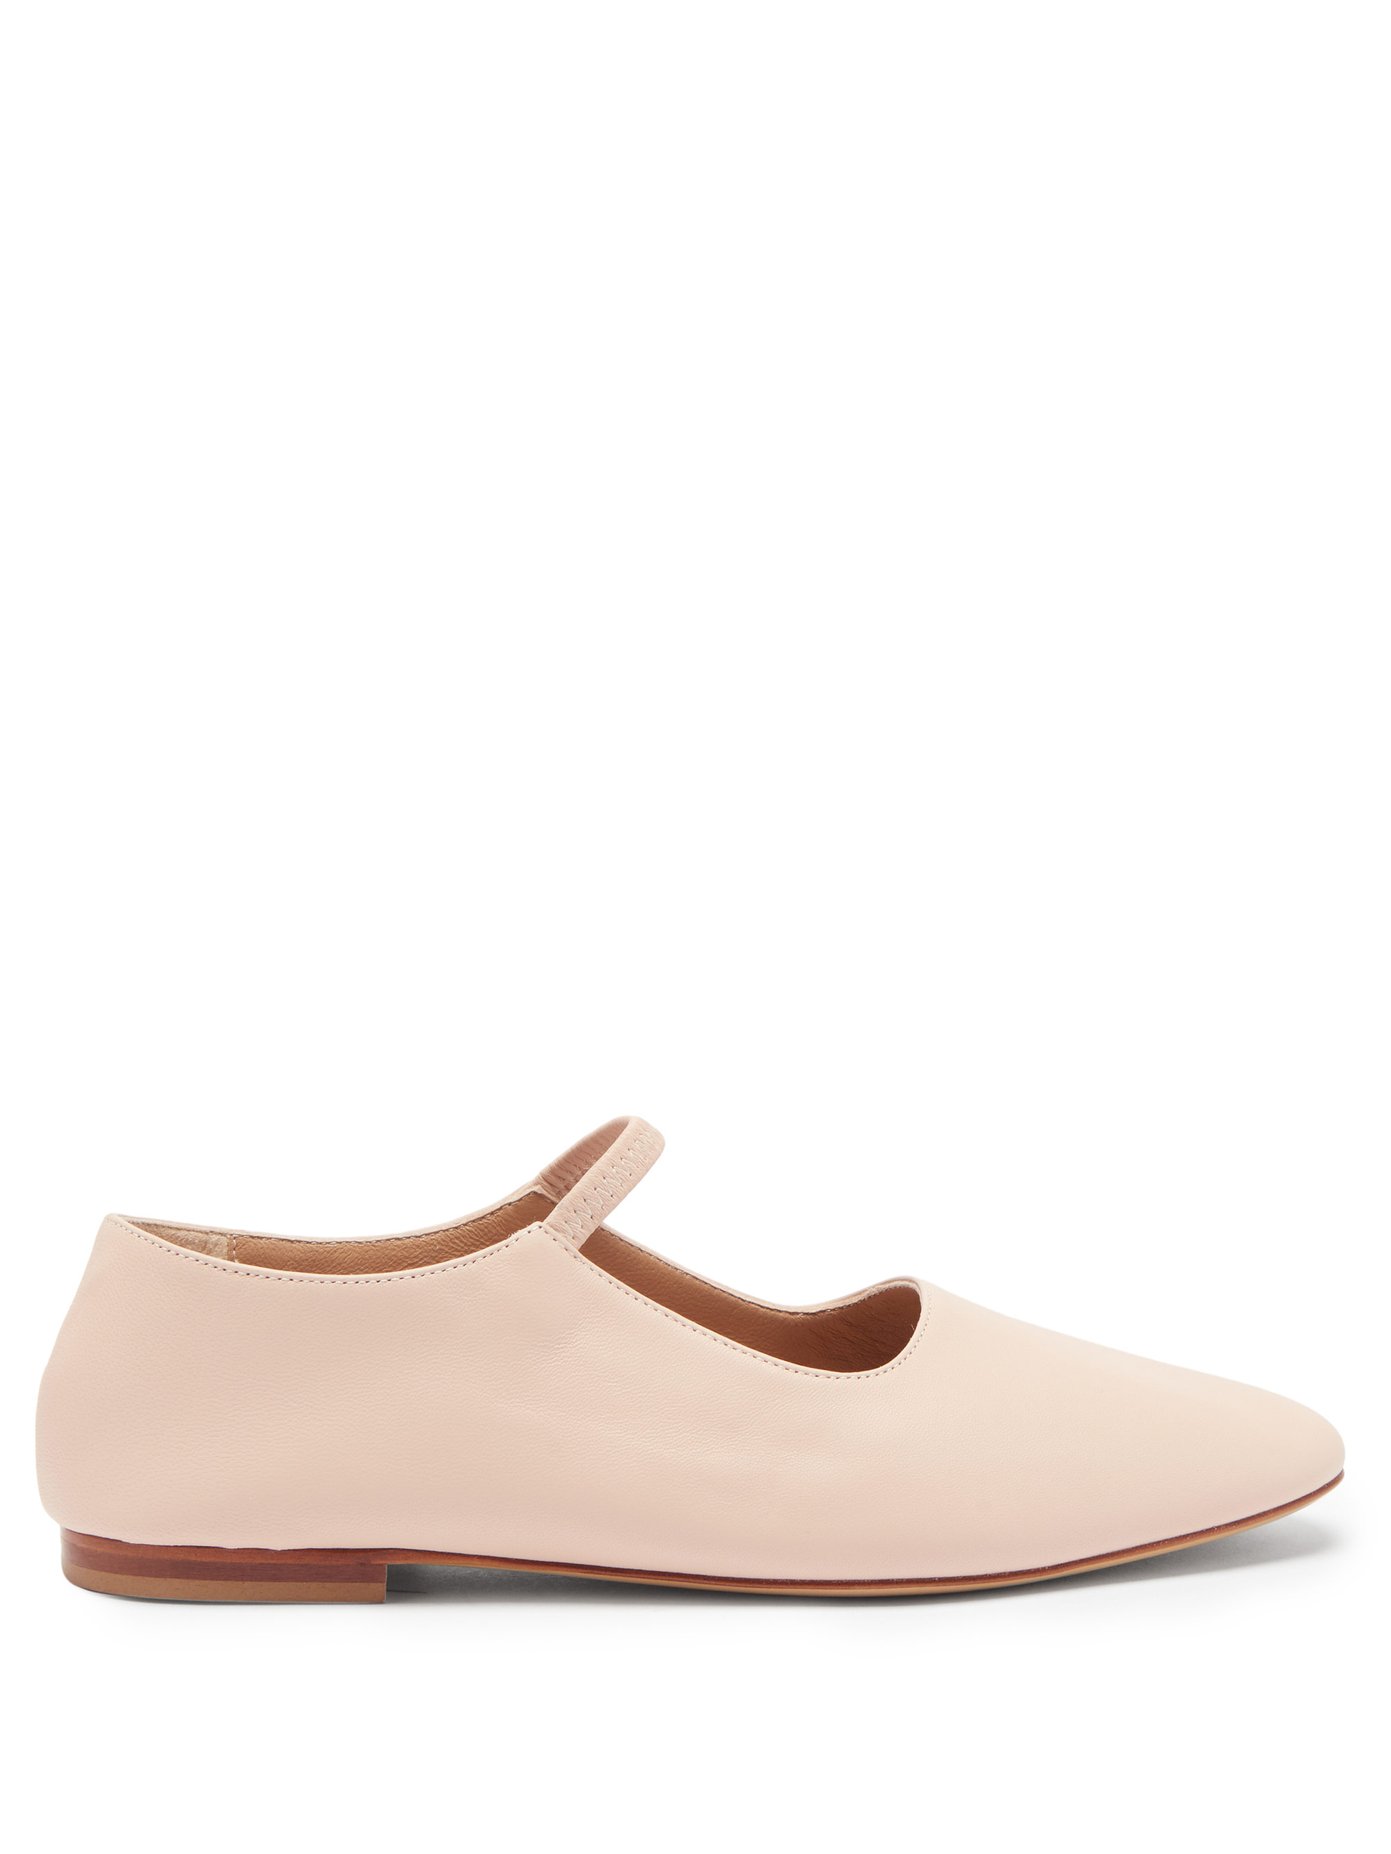 Glove leather Mary-Jane flats | Mansur 